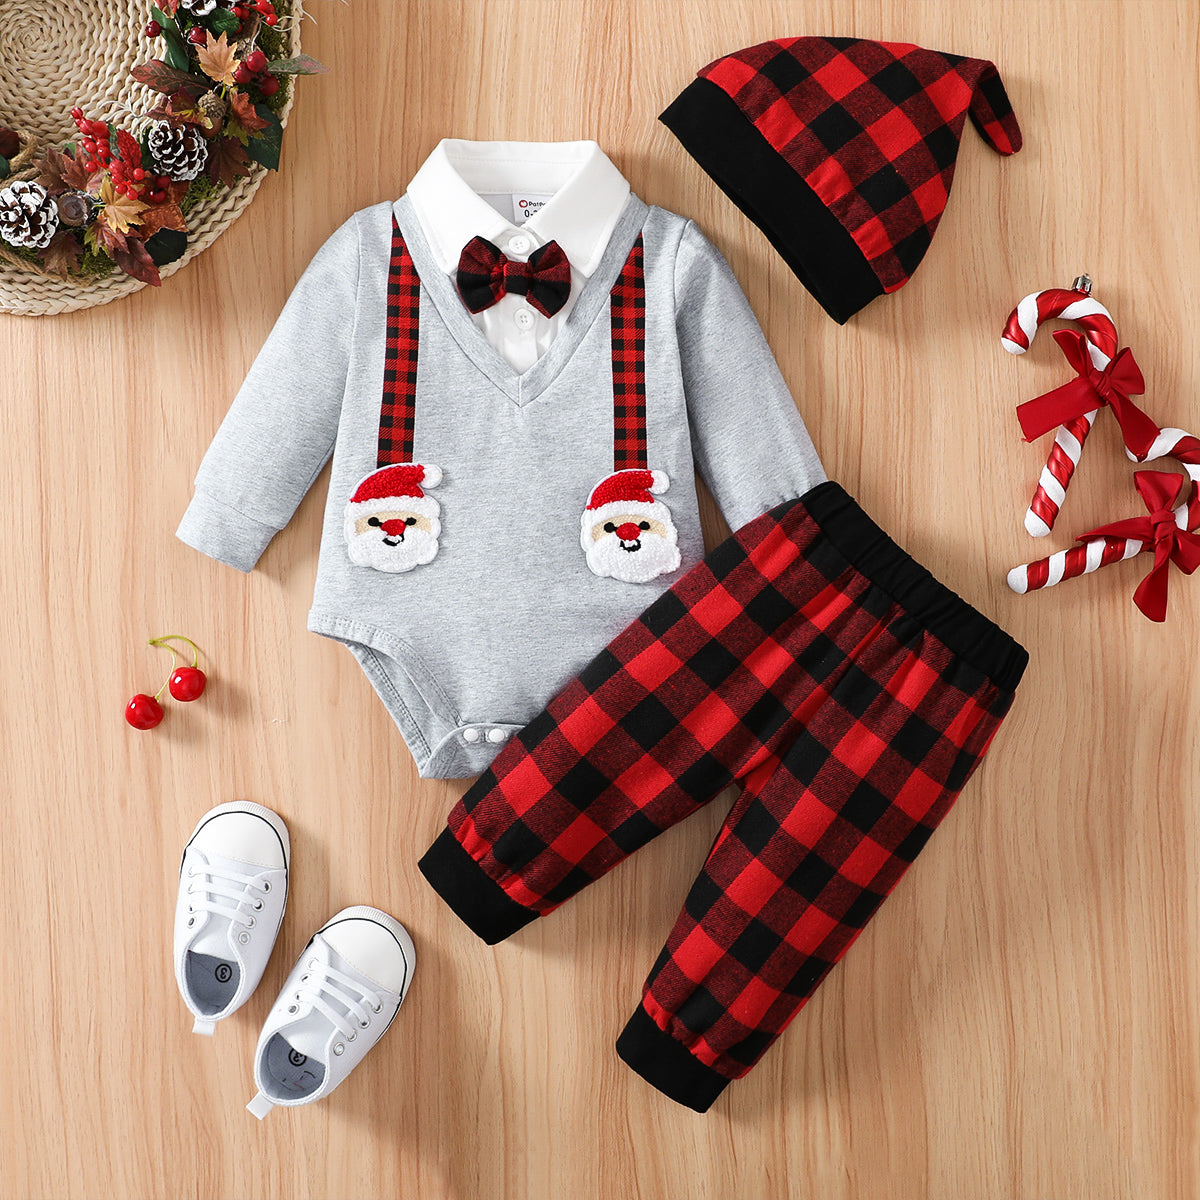 Christmas 3pcs Baby Boy 95% Cotton Long-sleeve Santa Badge Bow Tie Romper and Red Plaid Pants with Hat Set